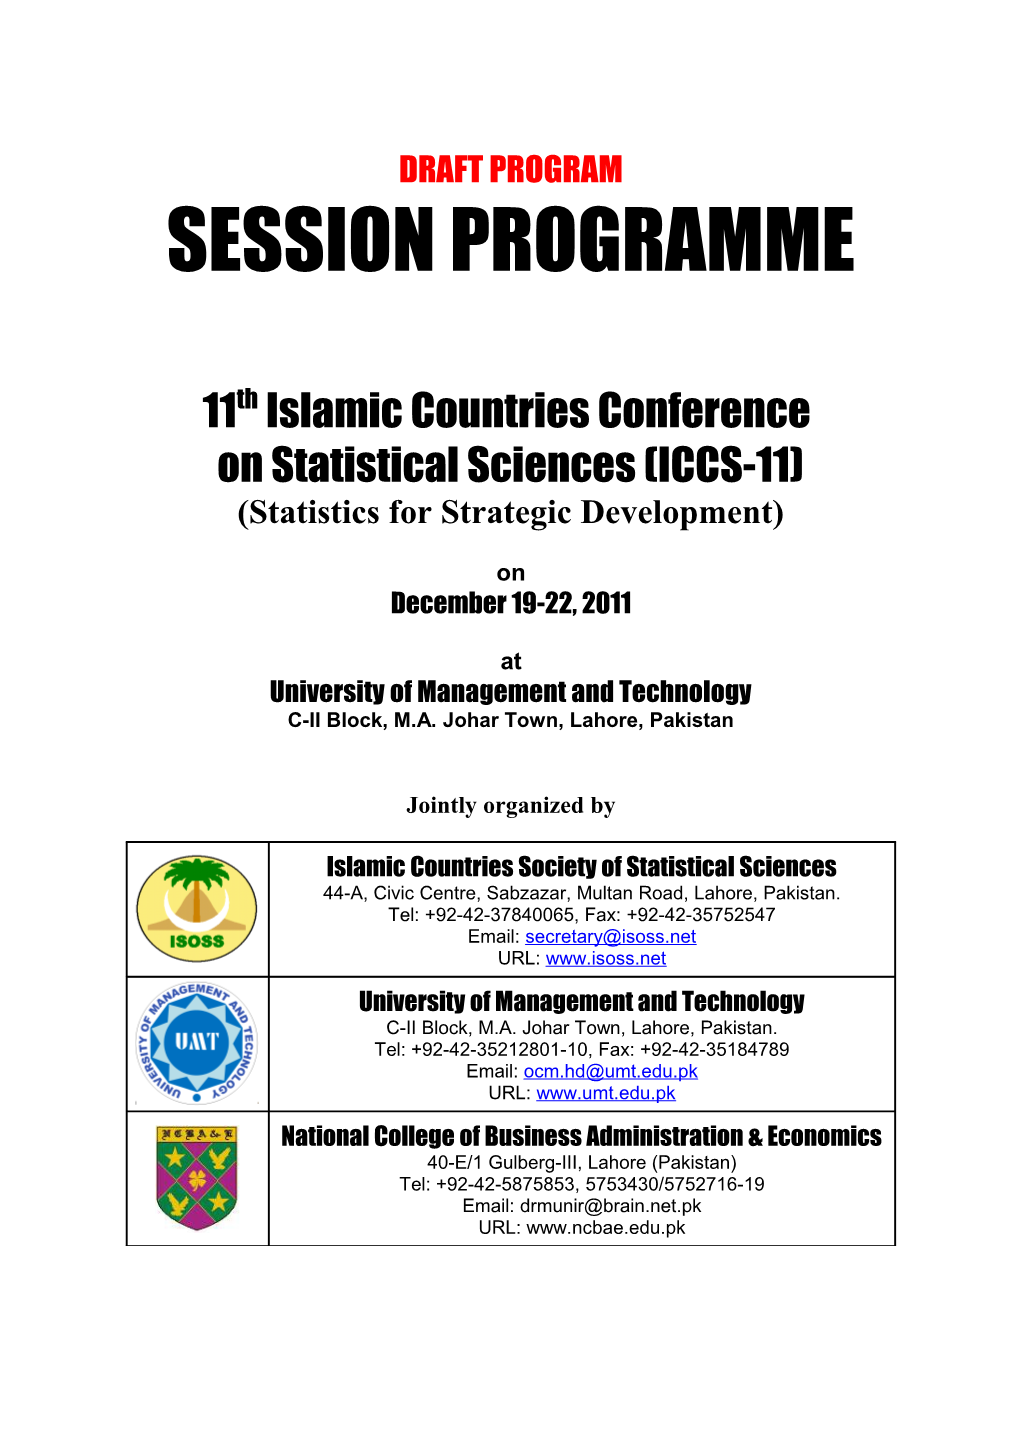 11Th Islamic Countries Conference on Statistical Sciences (ICCS-11)